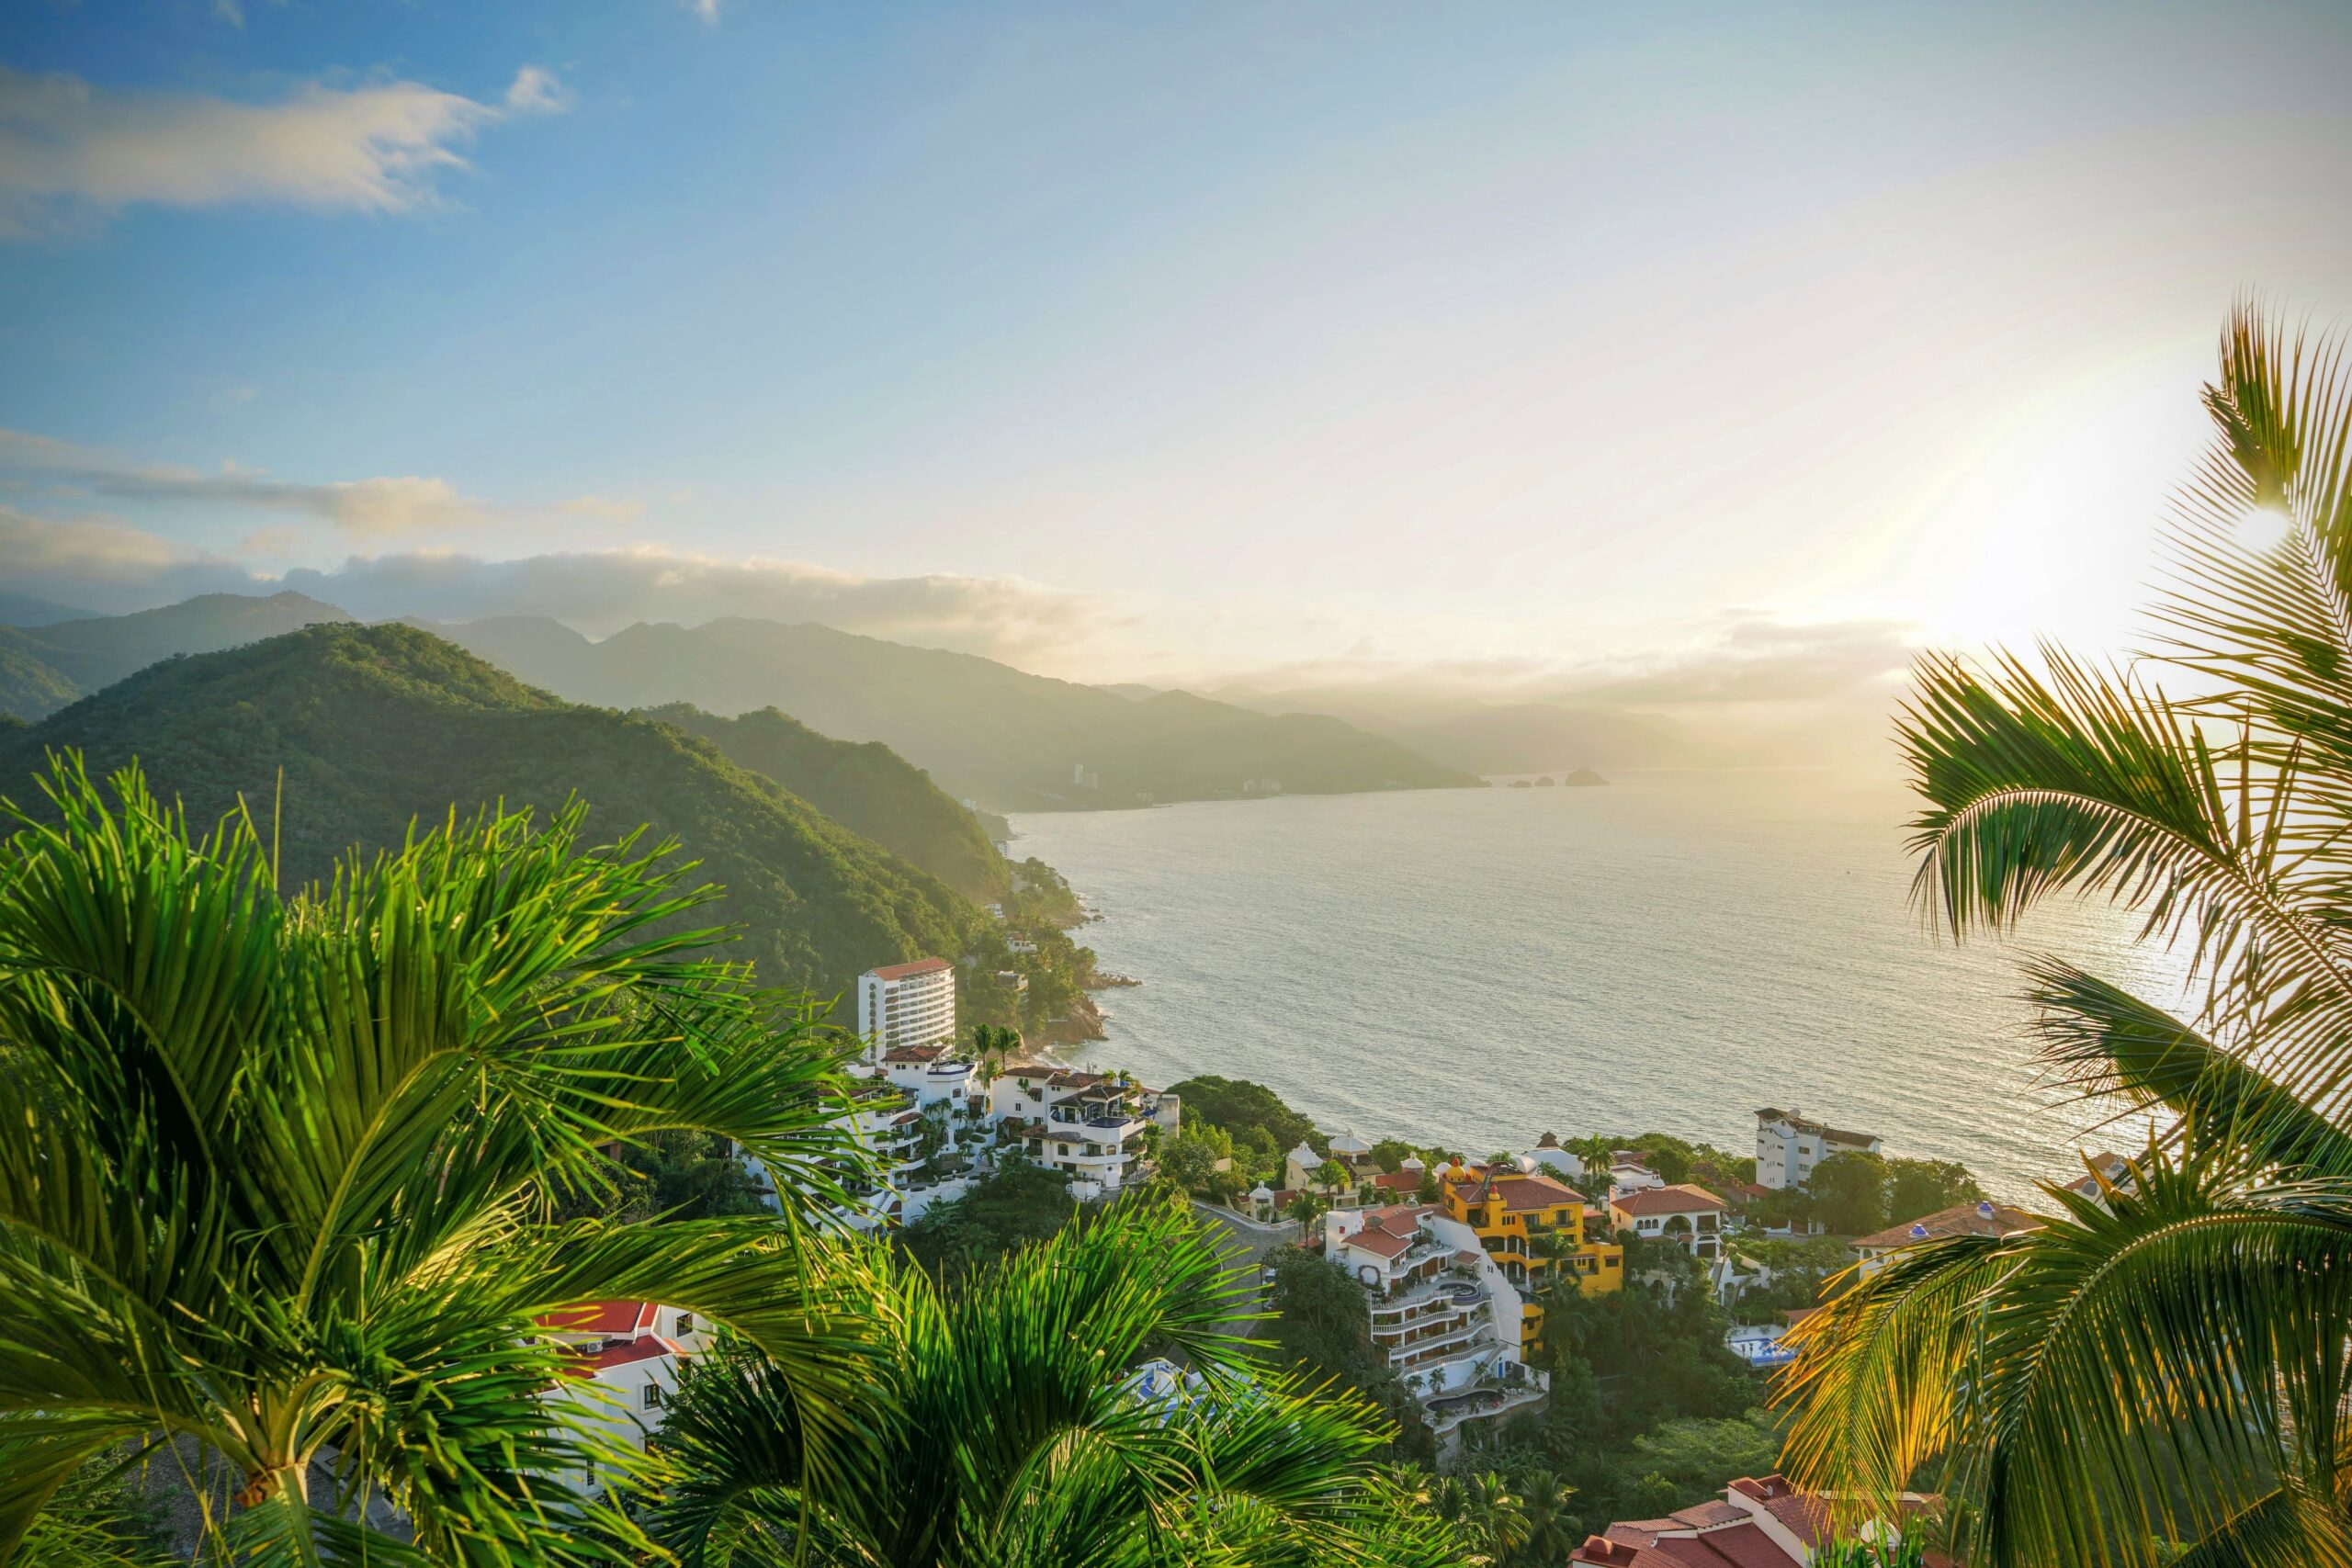 Travelers should consider a trip to Puerto Vallarta for a safe yet exciting tropical trip.
Pictured: the coast of Puerto Vallarta during sunset with a vibrant forest and town 